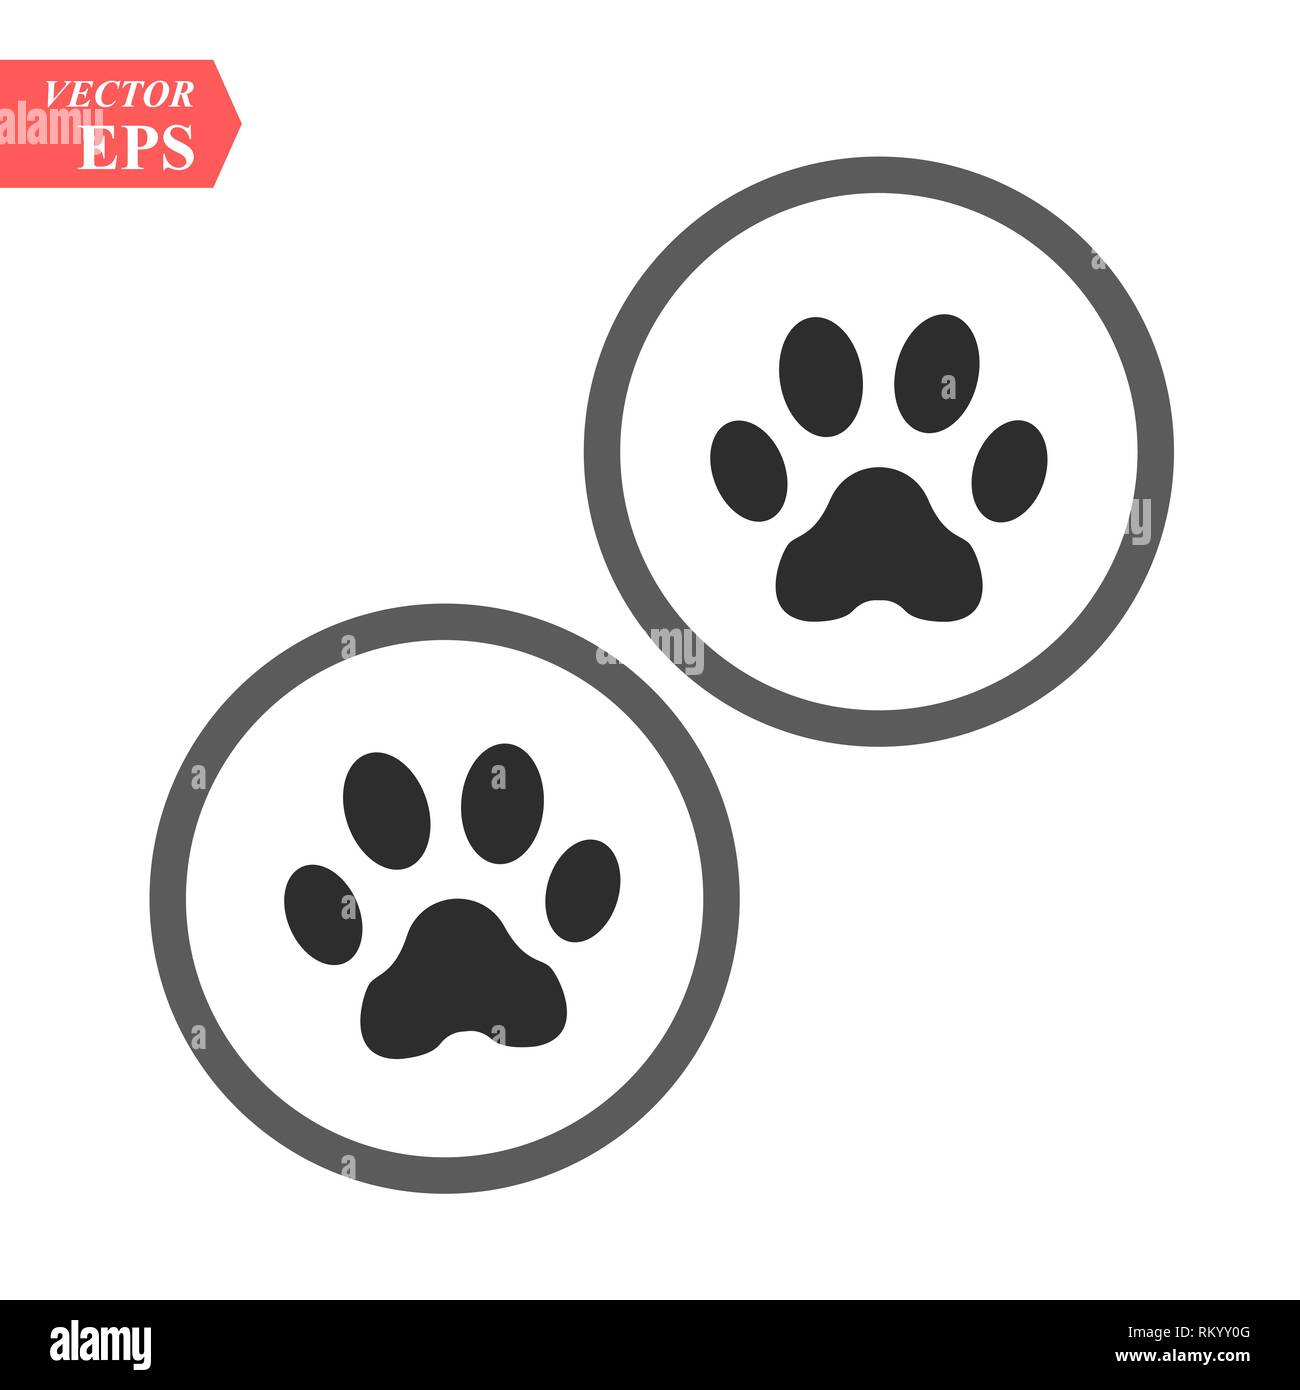 DOG PAW Collection